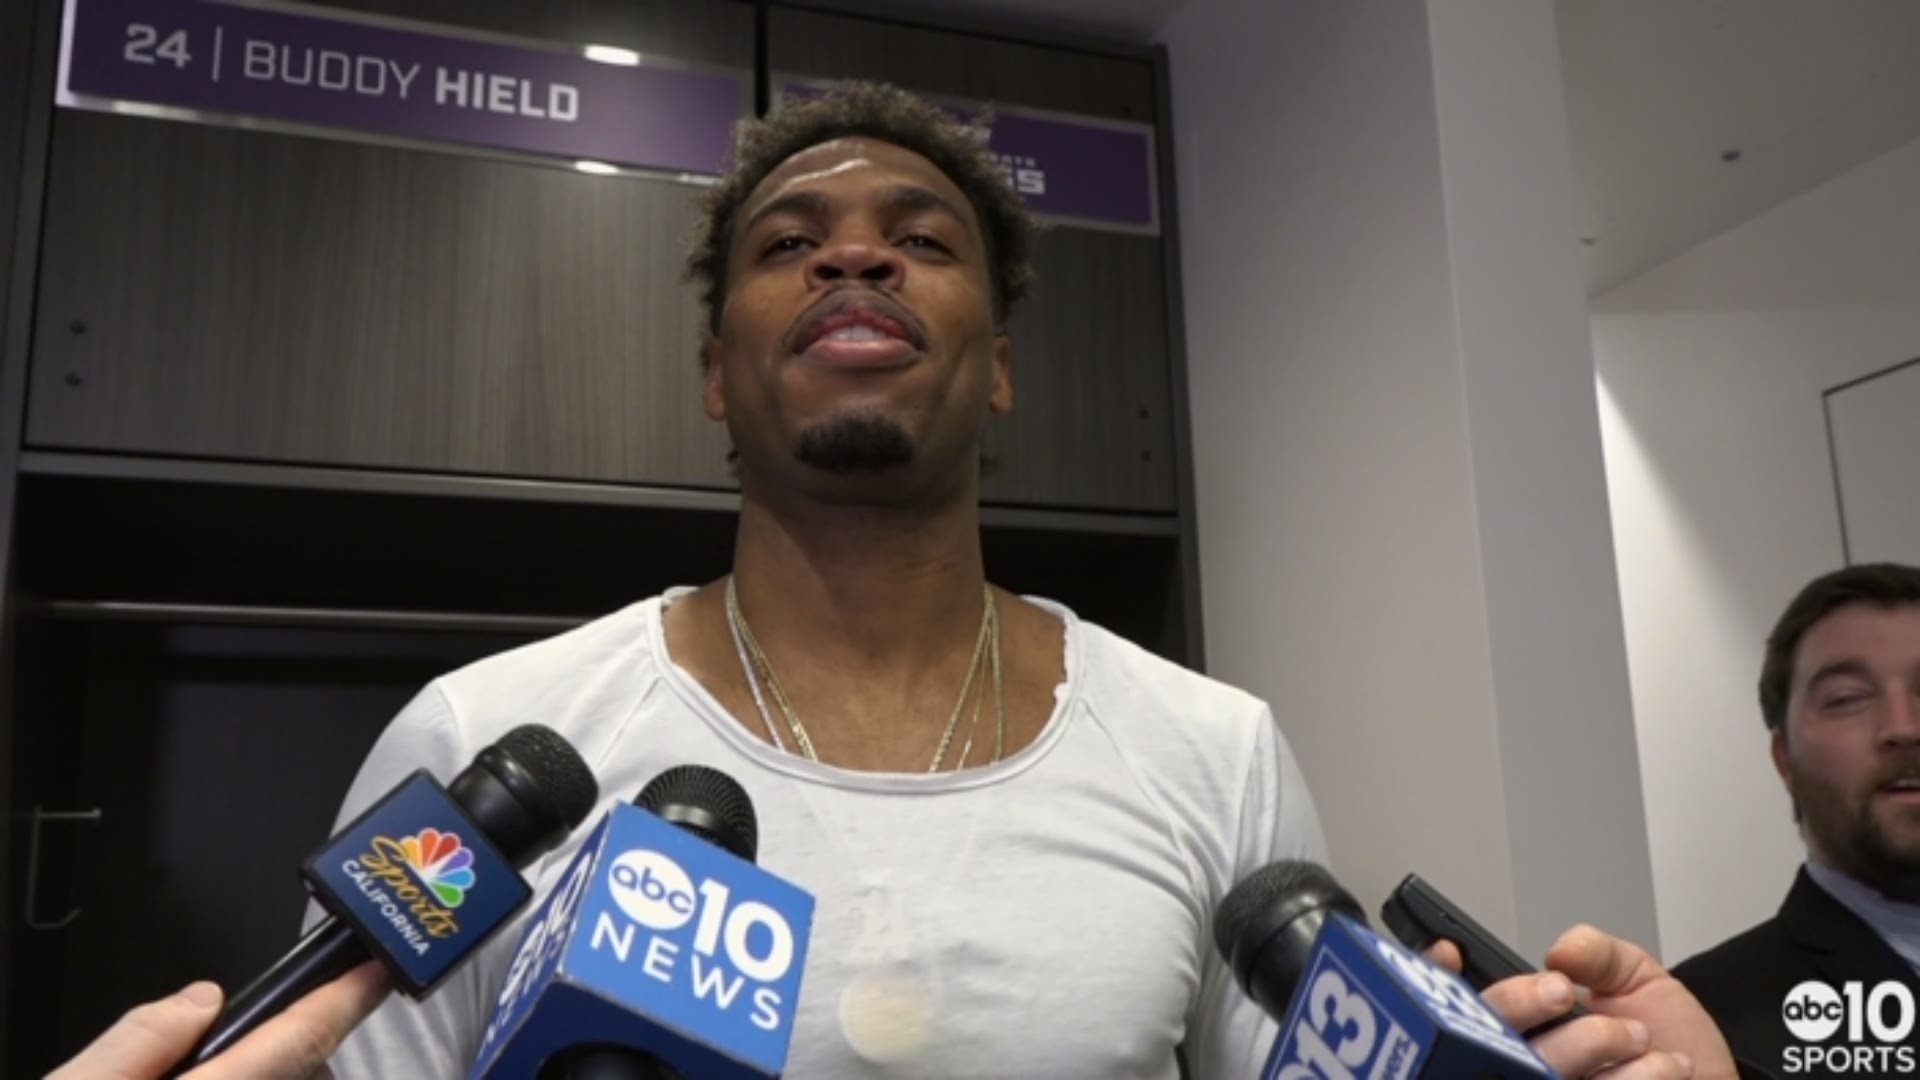 Buddy Hield talks about leading the Kings to a 115-108 victory over the Philadelphia 76ers on Saturday, his confidence in his improved shooting and his new career-high for most three-pointers made in a season.